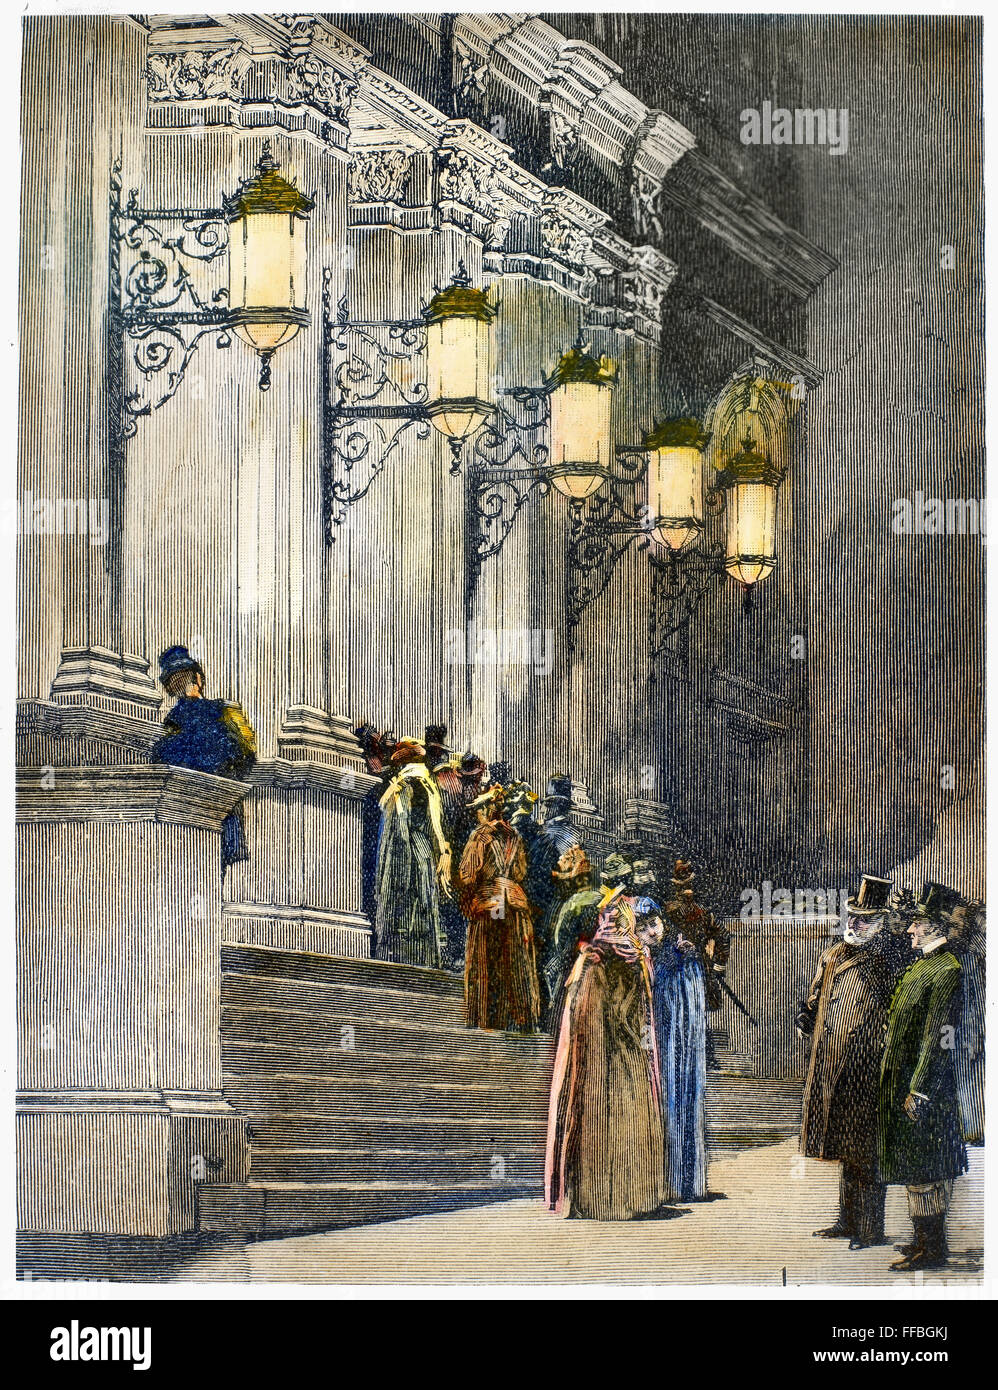 CARNEGIE HALL, 1891. /nThe 57th Street entrance of Carnegie Hall in New York City at its opening in May 1891. Contemporary American line engraving. Stock Photo